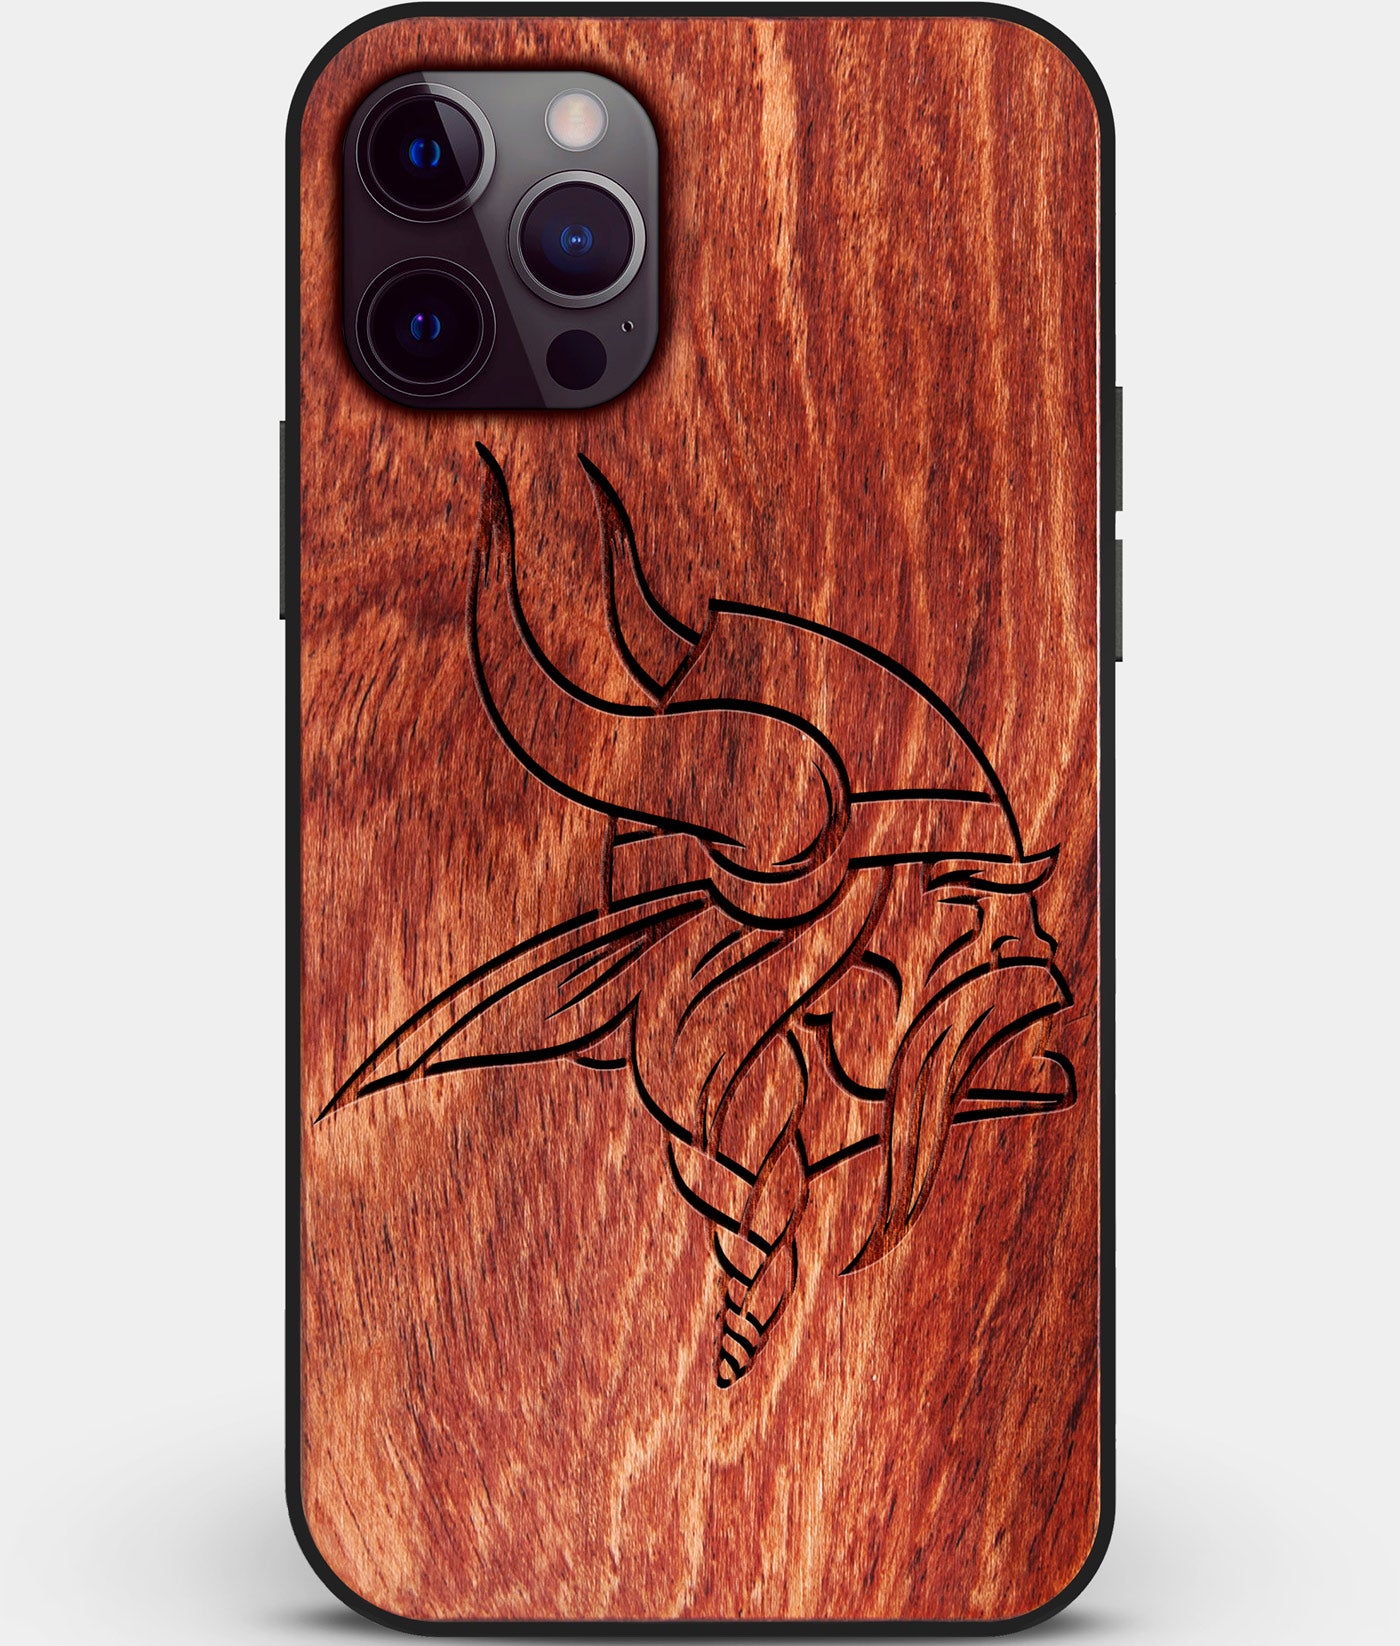 Custom Carved Wood Minnesota Vikings iPhone 12 Pro Case | Personalized Mahogany Wood Minnesota Vikings Cover, Birthday Gift, Gifts For Him, Monogrammed Gift For Fan | by Engraved In Nature